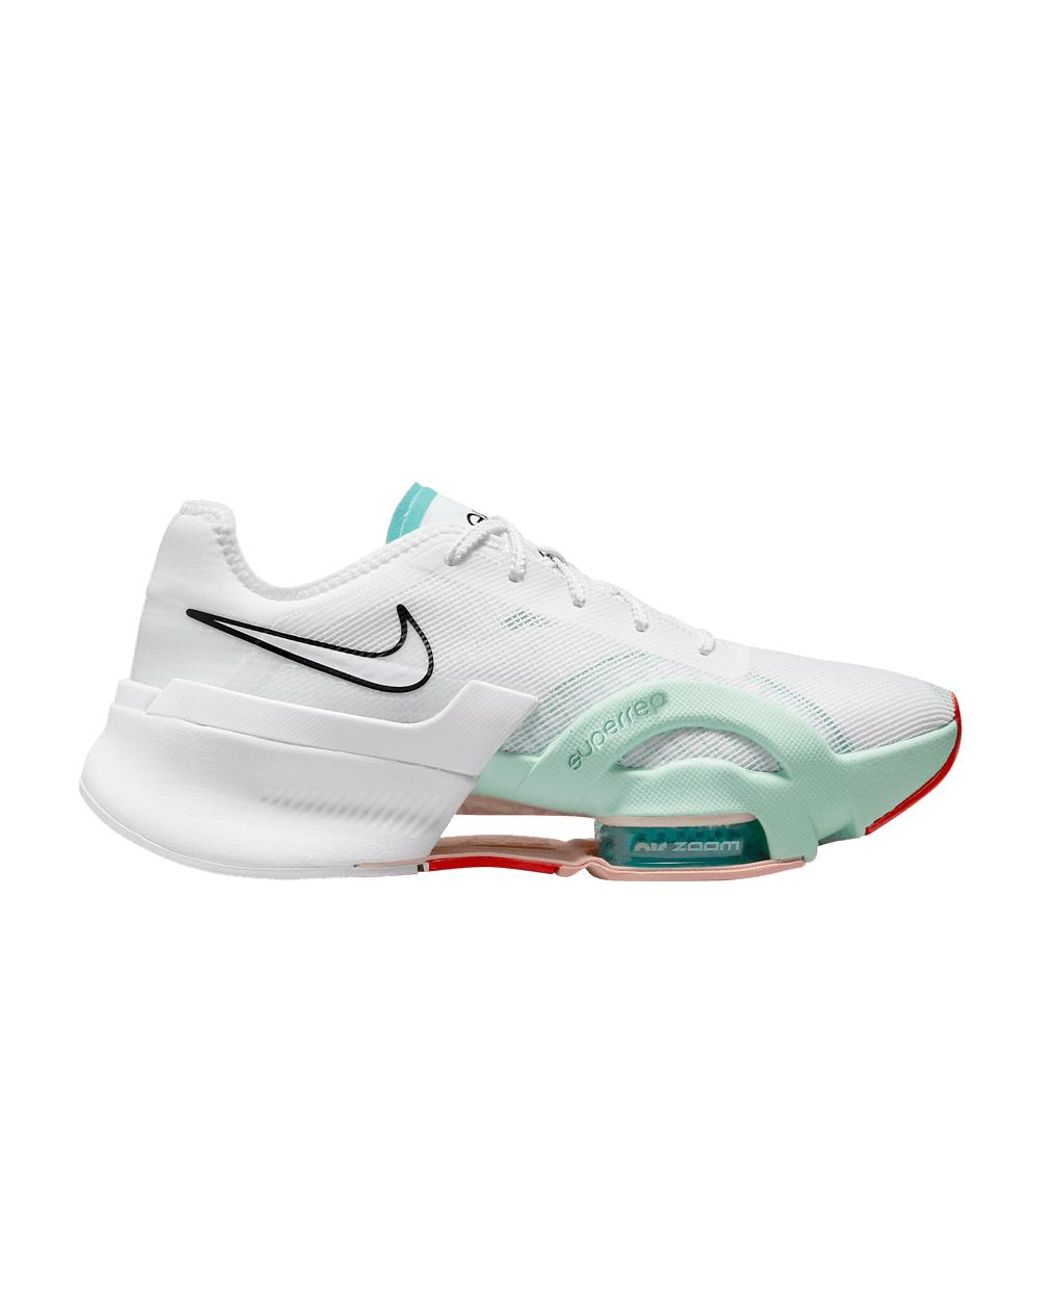 Nike Air Zoom Superrep 3 'white Washed Teal' in Blue | Lyst